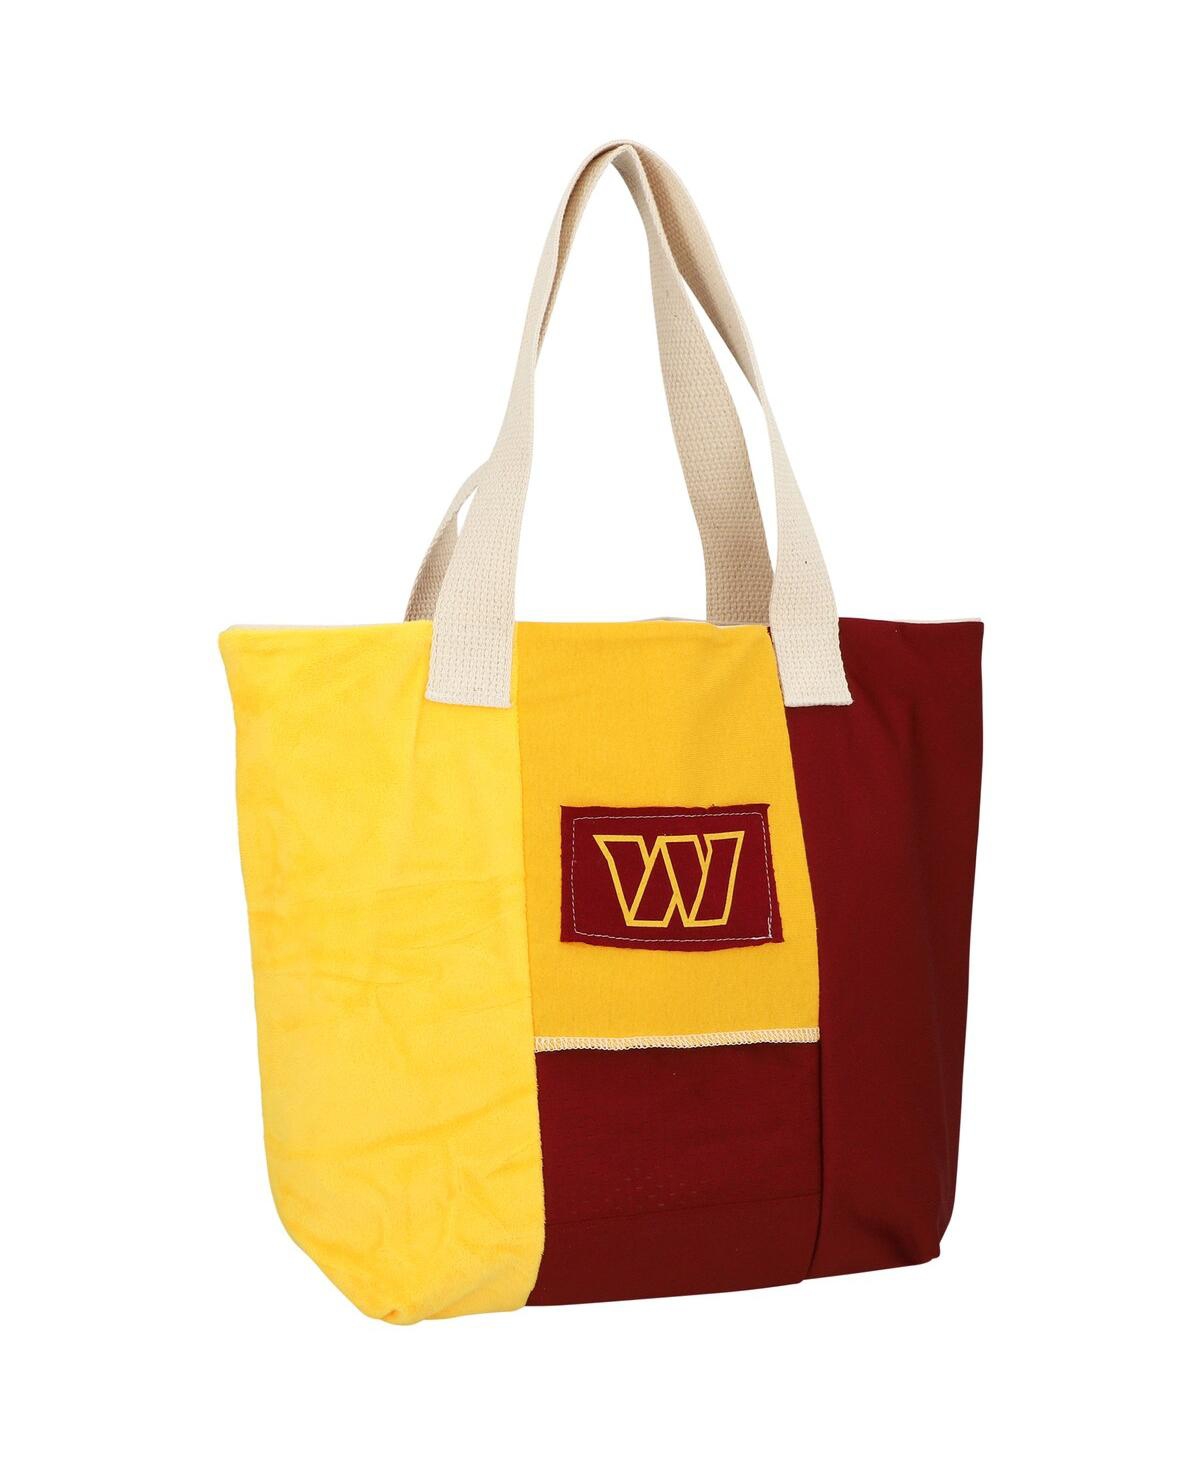 Refried Apparel Women's  Washington Commanders Tote Bag In Yellow,red